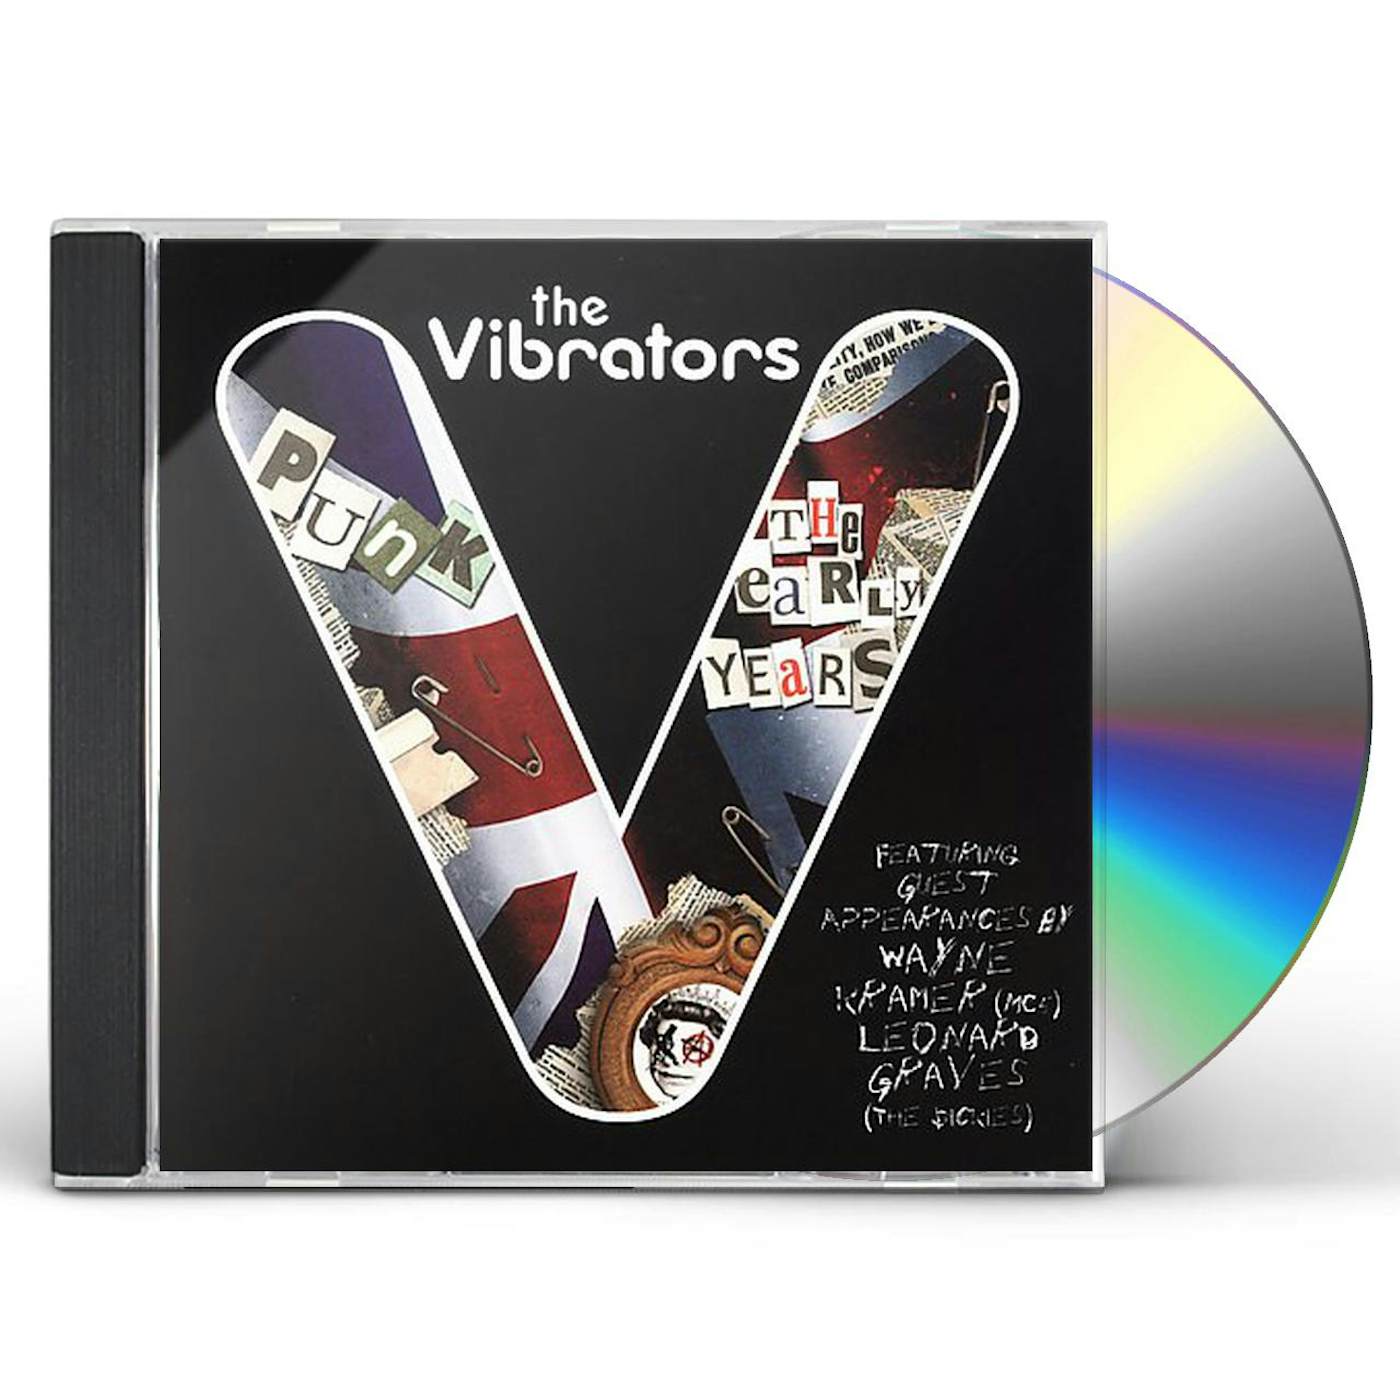 The Vibrators PUNK: EARLY YEARS CD